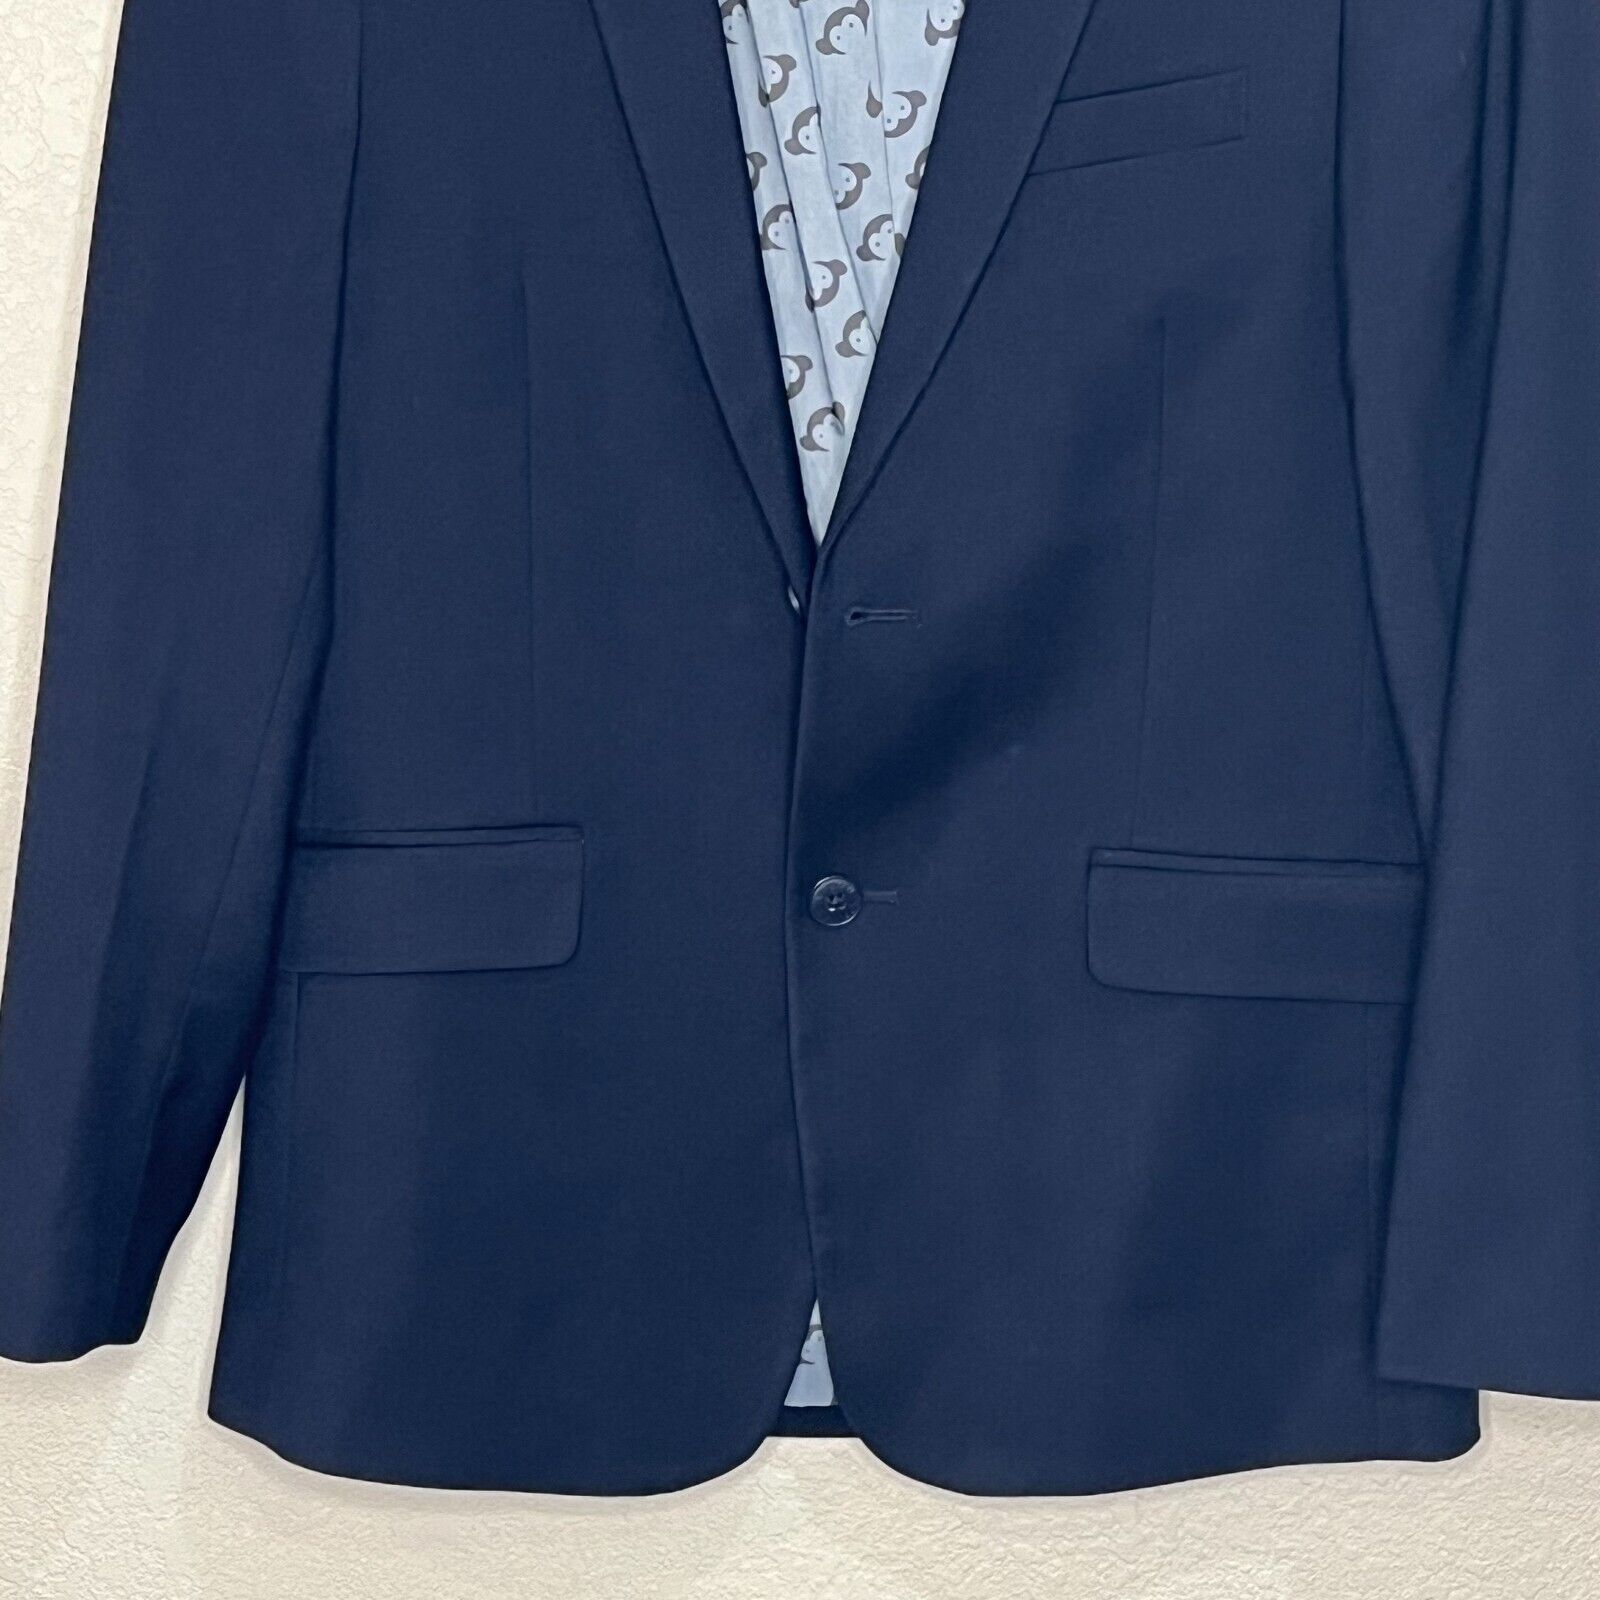 Appaman Boy's Navy Blue Solid-Color Suit Jacket Size 16 (Age 11-12)